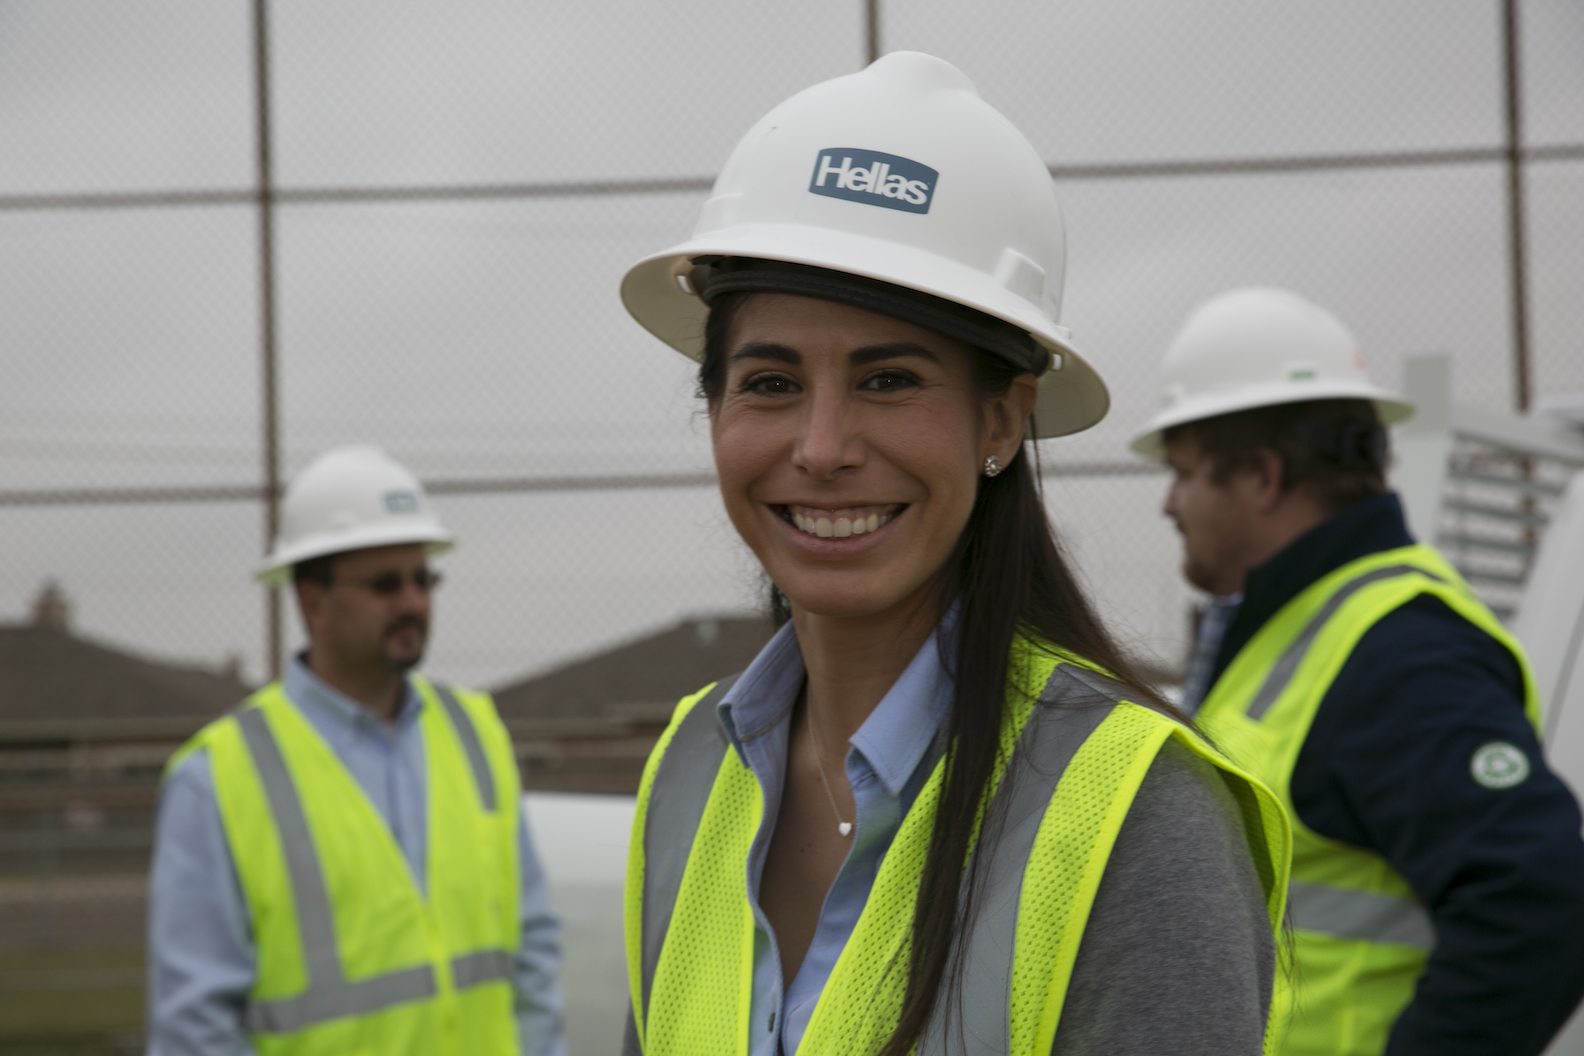 Tianna Flores, vice president of design for Hellas Construction, at the Portland TX groundbreaking in December 2016.